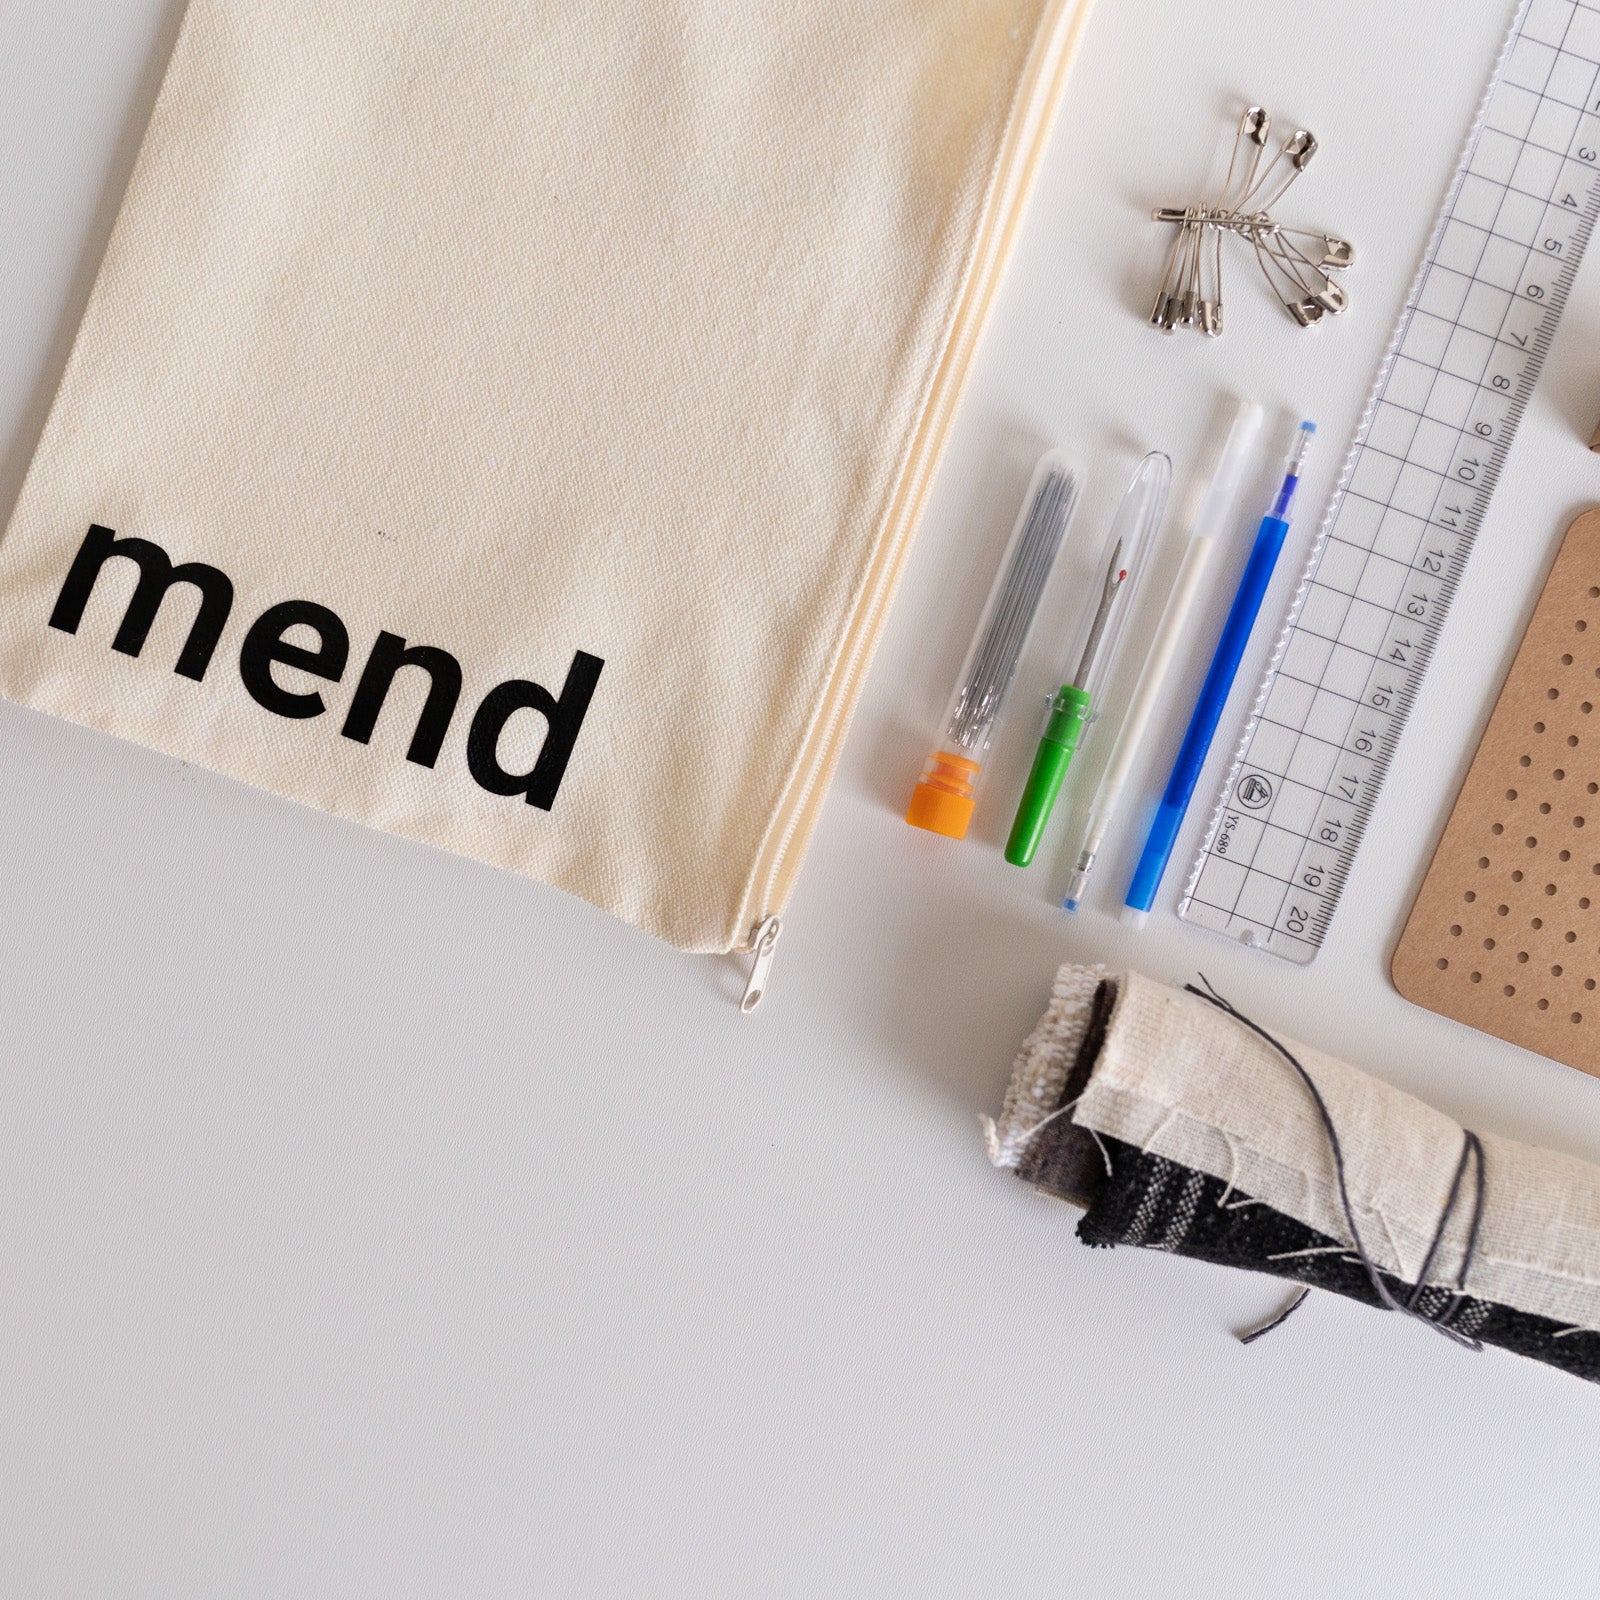 Limited Edition: Master Mending Kit by Gather